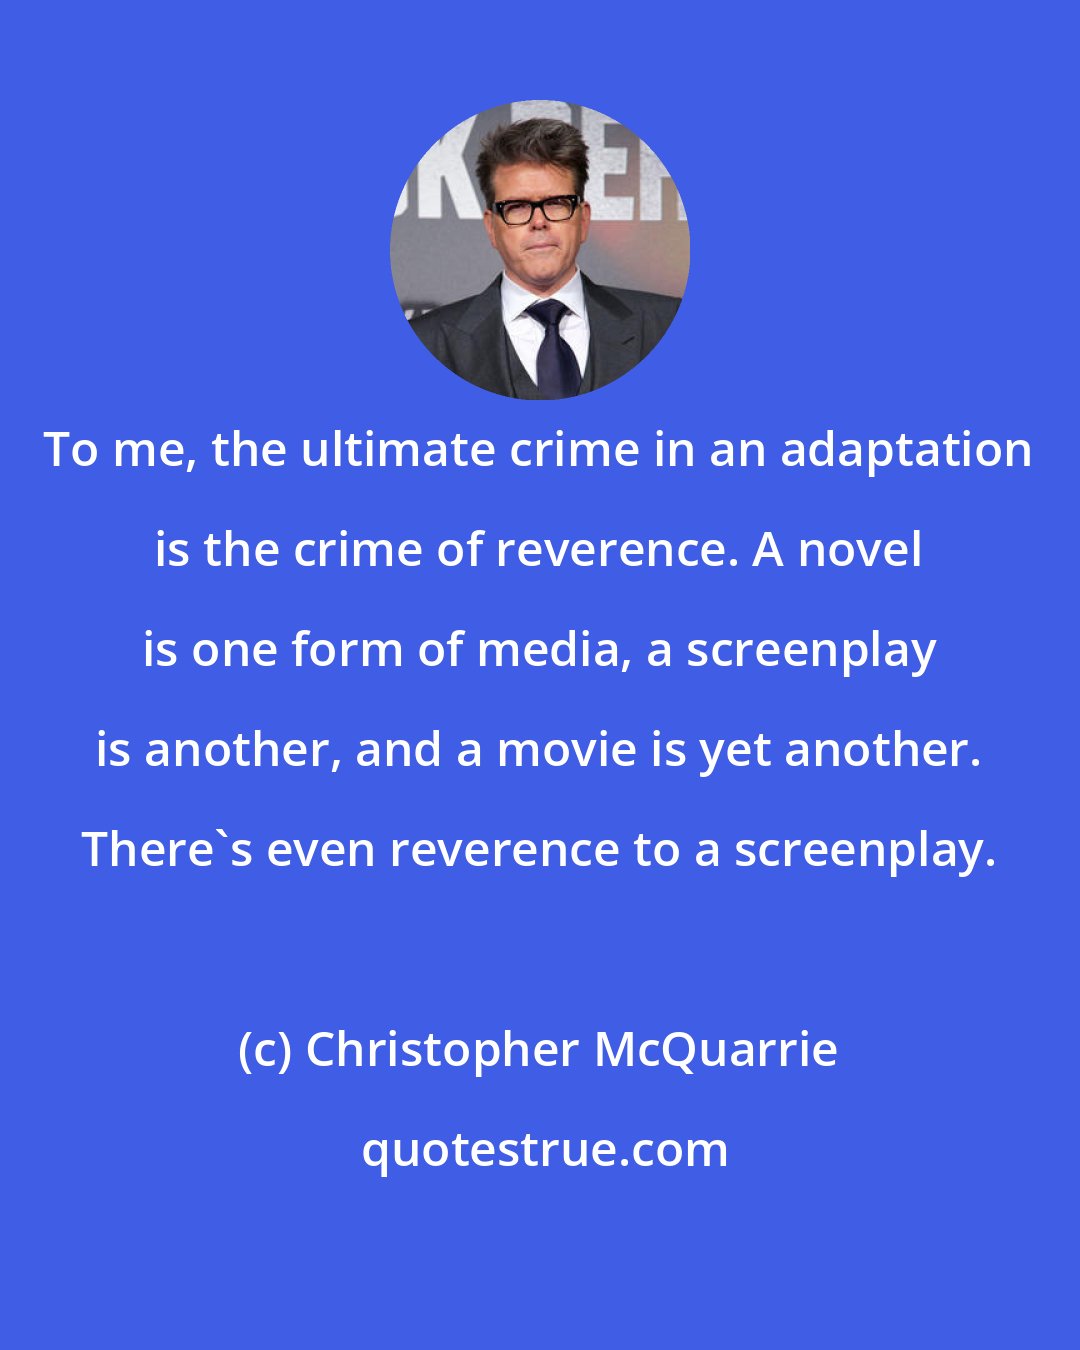 Christopher McQuarrie: To me, the ultimate crime in an adaptation is the crime of reverence. A novel is one form of media, a screenplay is another, and a movie is yet another. There's even reverence to a screenplay.